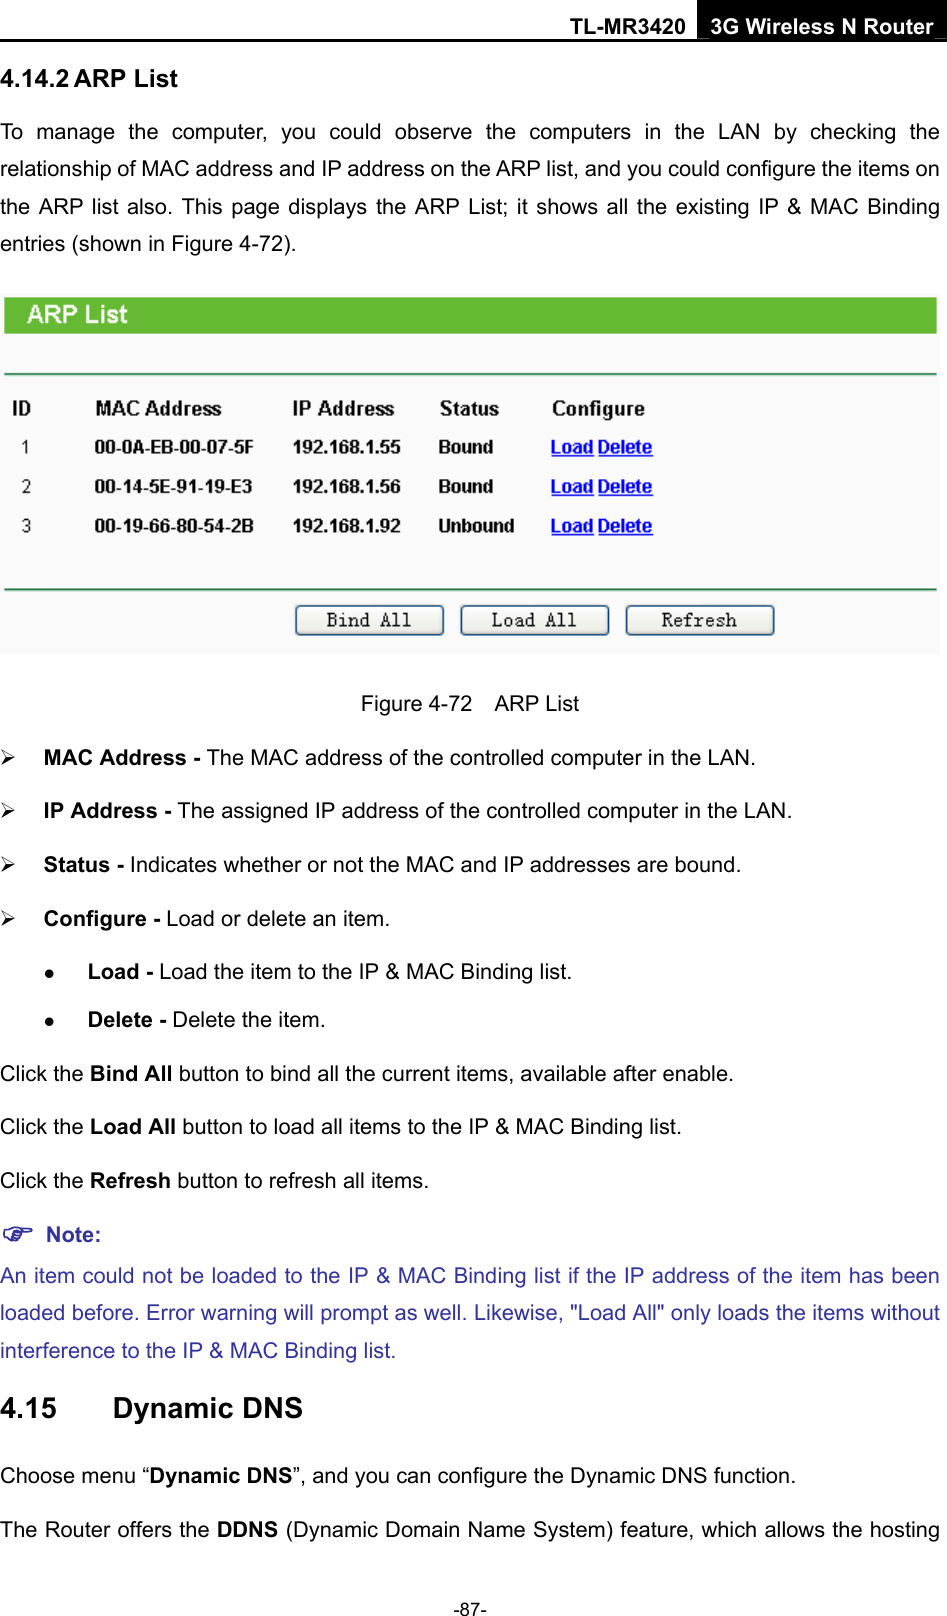 TL-MR3420 3G Wireless N Router -87- 4.14.2 ARP List To manage the computer, you could observe the computers in the LAN by checking the relationship of MAC address and IP address on the ARP list, and you could configure the items on the ARP list also. This page displays the ARP List; it shows all the existing IP &amp; MAC Binding entries (shown in Figure 4-72).    Figure 4-72  ARP List ¾ MAC Address - The MAC address of the controlled computer in the LAN.   ¾ IP Address - The assigned IP address of the controlled computer in the LAN.   ¾ Status - Indicates whether or not the MAC and IP addresses are bound. ¾ Configure - Load or delete an item.   z Load - Load the item to the IP &amp; MAC Binding list.   z Delete - Delete the item.   Click the Bind All button to bind all the current items, available after enable. Click the Load All button to load all items to the IP &amp; MAC Binding list. Click the Refresh button to refresh all items. ) Note: An item could not be loaded to the IP &amp; MAC Binding list if the IP address of the item has been loaded before. Error warning will prompt as well. Likewise, &quot;Load All&quot; only loads the items without interference to the IP &amp; MAC Binding list. 4.15  Dynamic DNS Choose menu “Dynamic DNS”, and you can configure the Dynamic DNS function.   The Router offers the DDNS (Dynamic Domain Name System) feature, which allows the hosting 